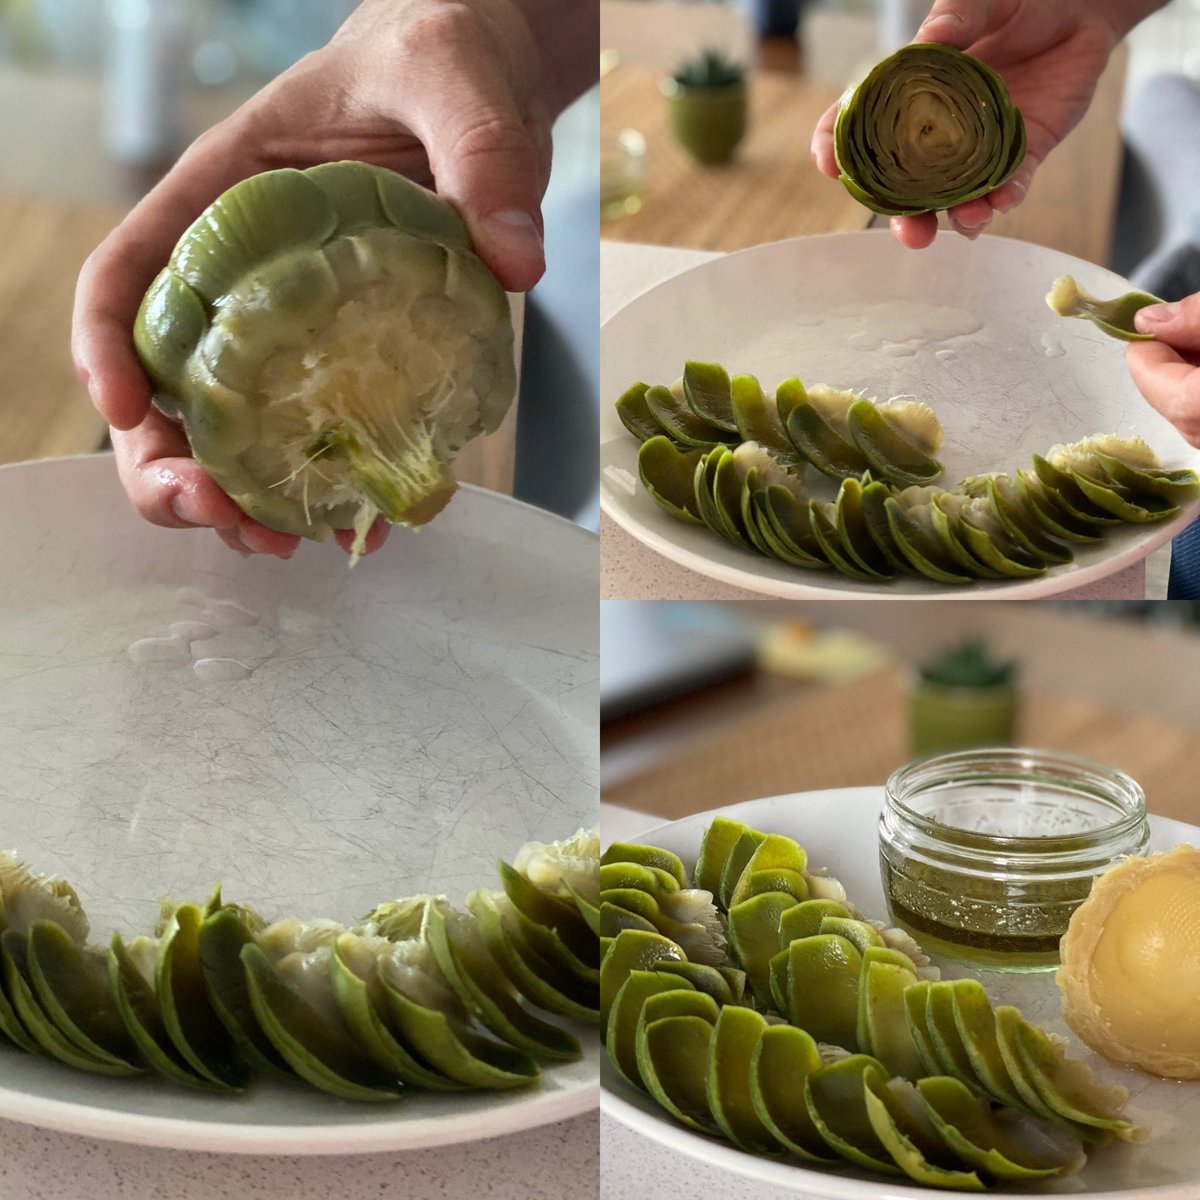 We put an artichoke from @TheAlbanyGarden through the healthy snack test - delicious!#artichokesnack  #successfultest